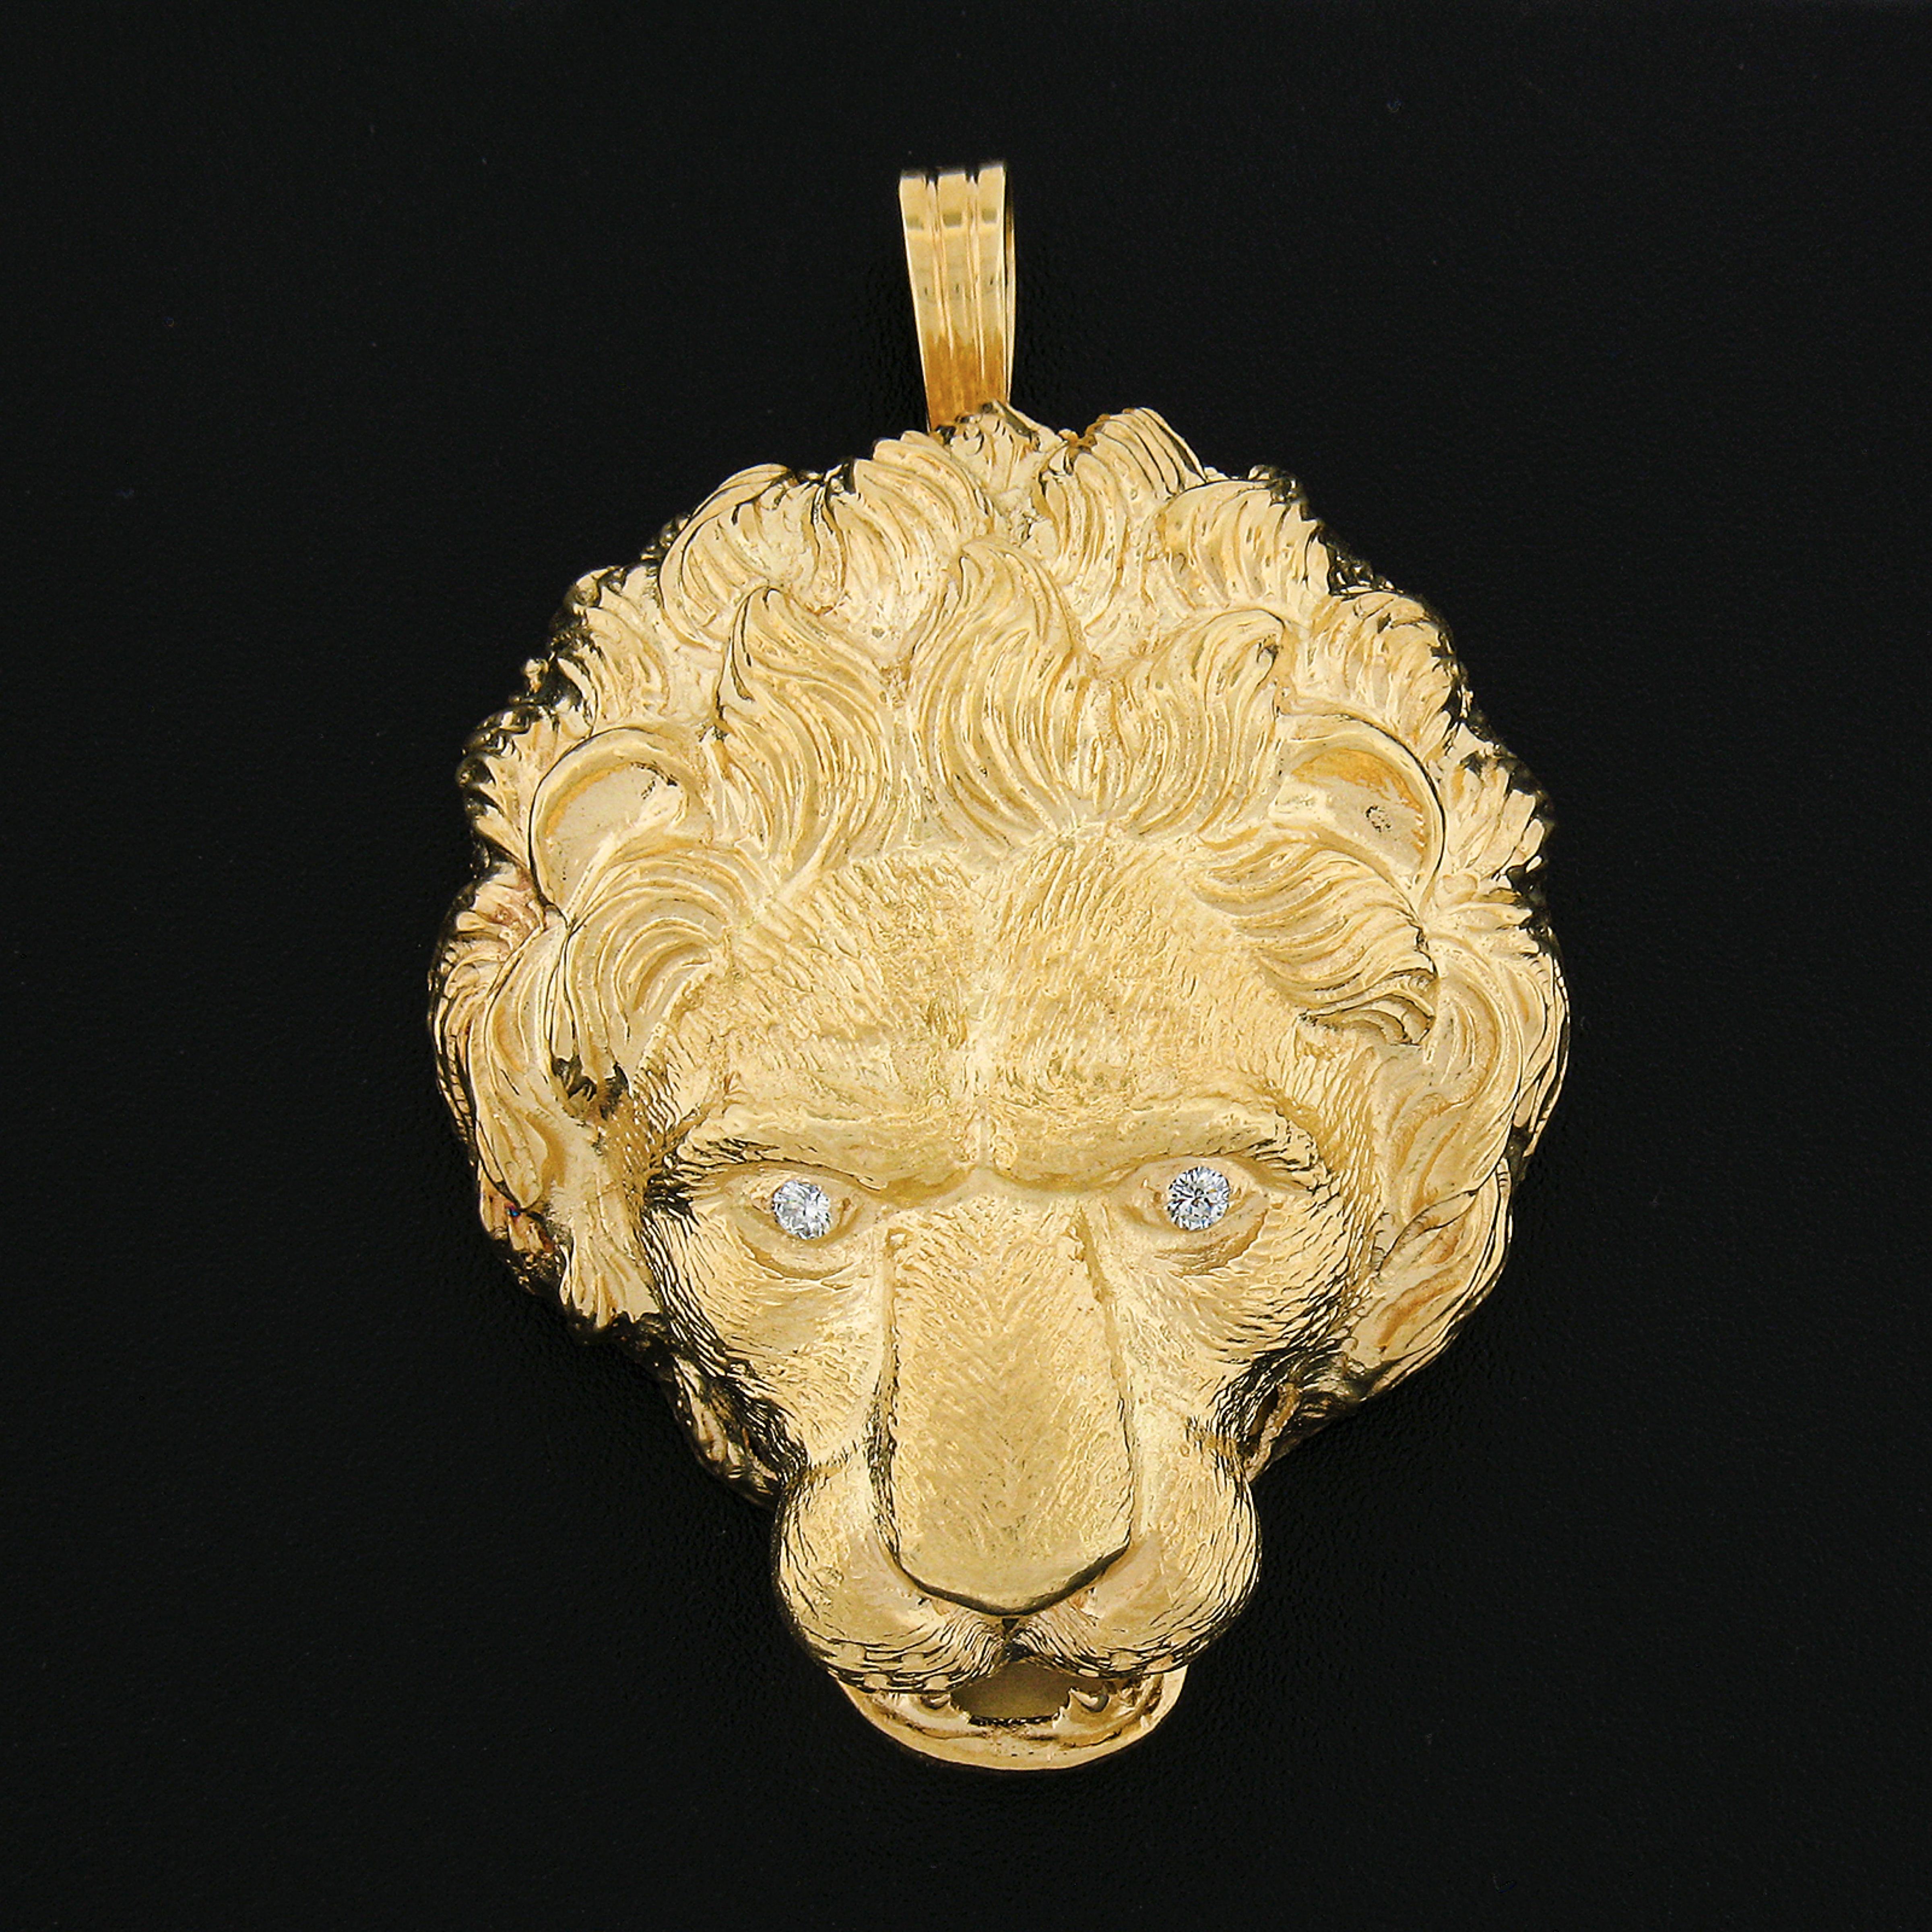 This incredible and very well made statement vintage brooch/pendant is crafted in solid 18k yellow gold, and features a LARGE lion head design with remarkably outstanding workmanship and texture that bring out maximum detailing granting a truly